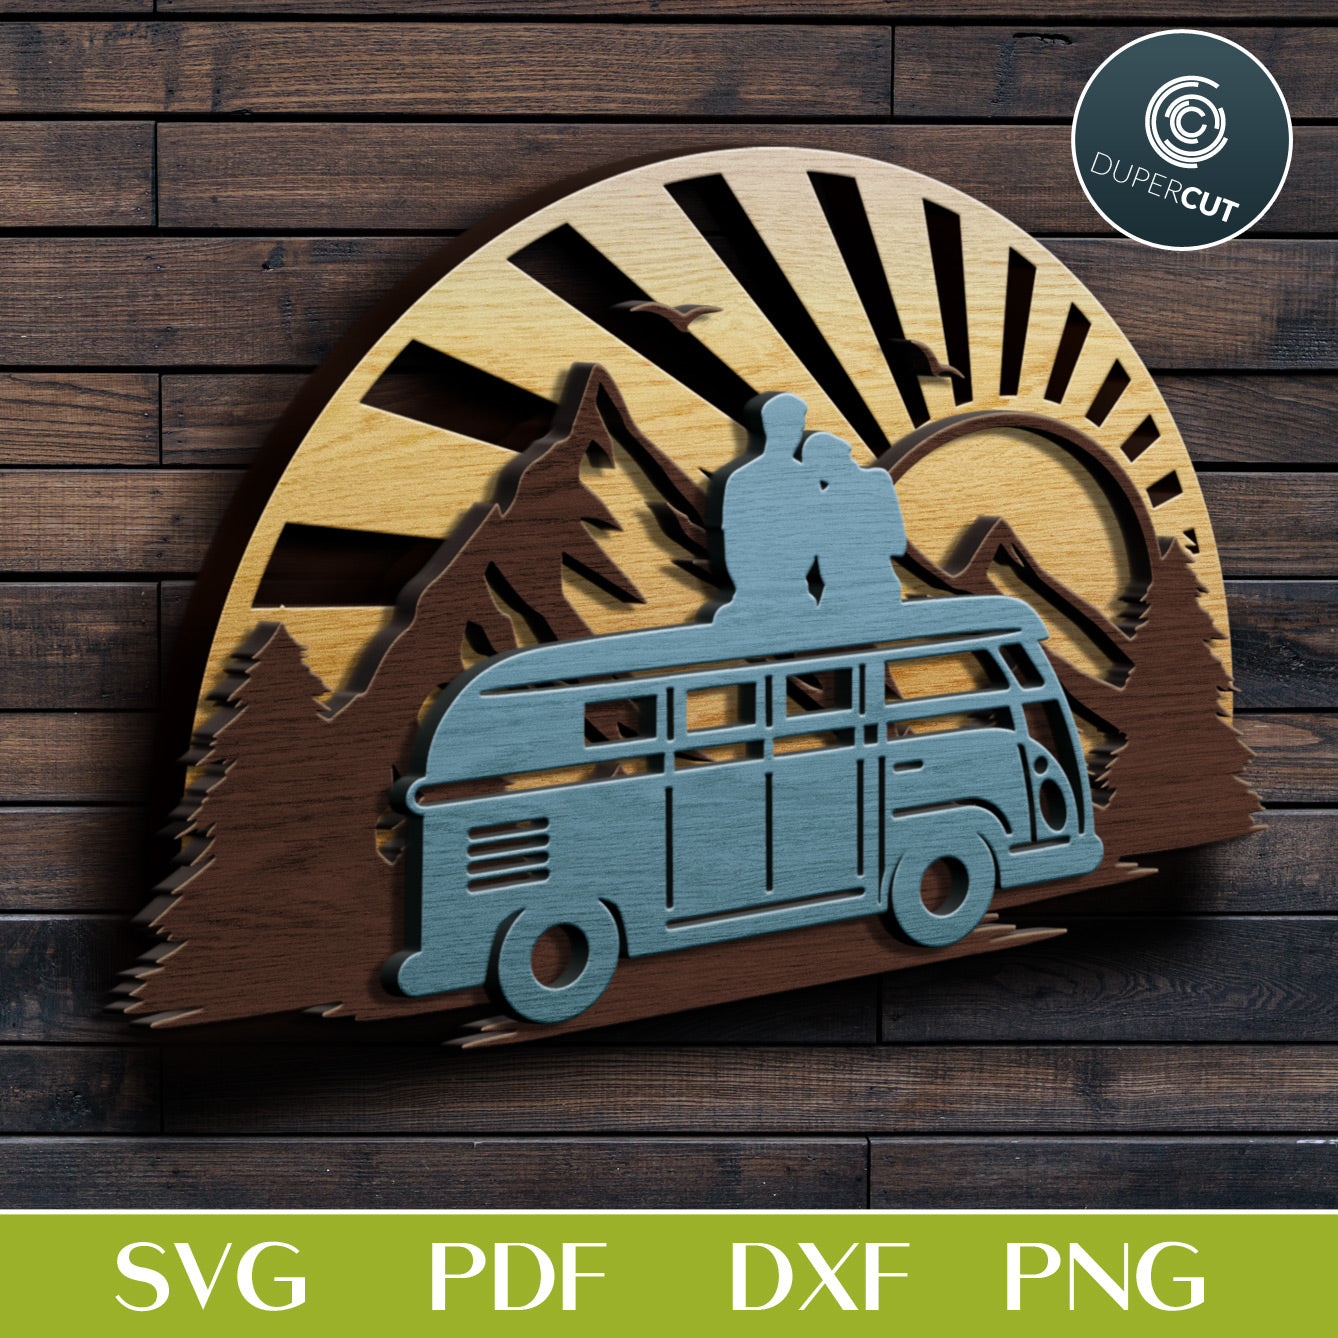 Camper with love couple wilderness sign - SVG PDF DXF dual-layer cutting files for Glowforge, Cricut, Silhouette, CNC plasma machines, woodworking